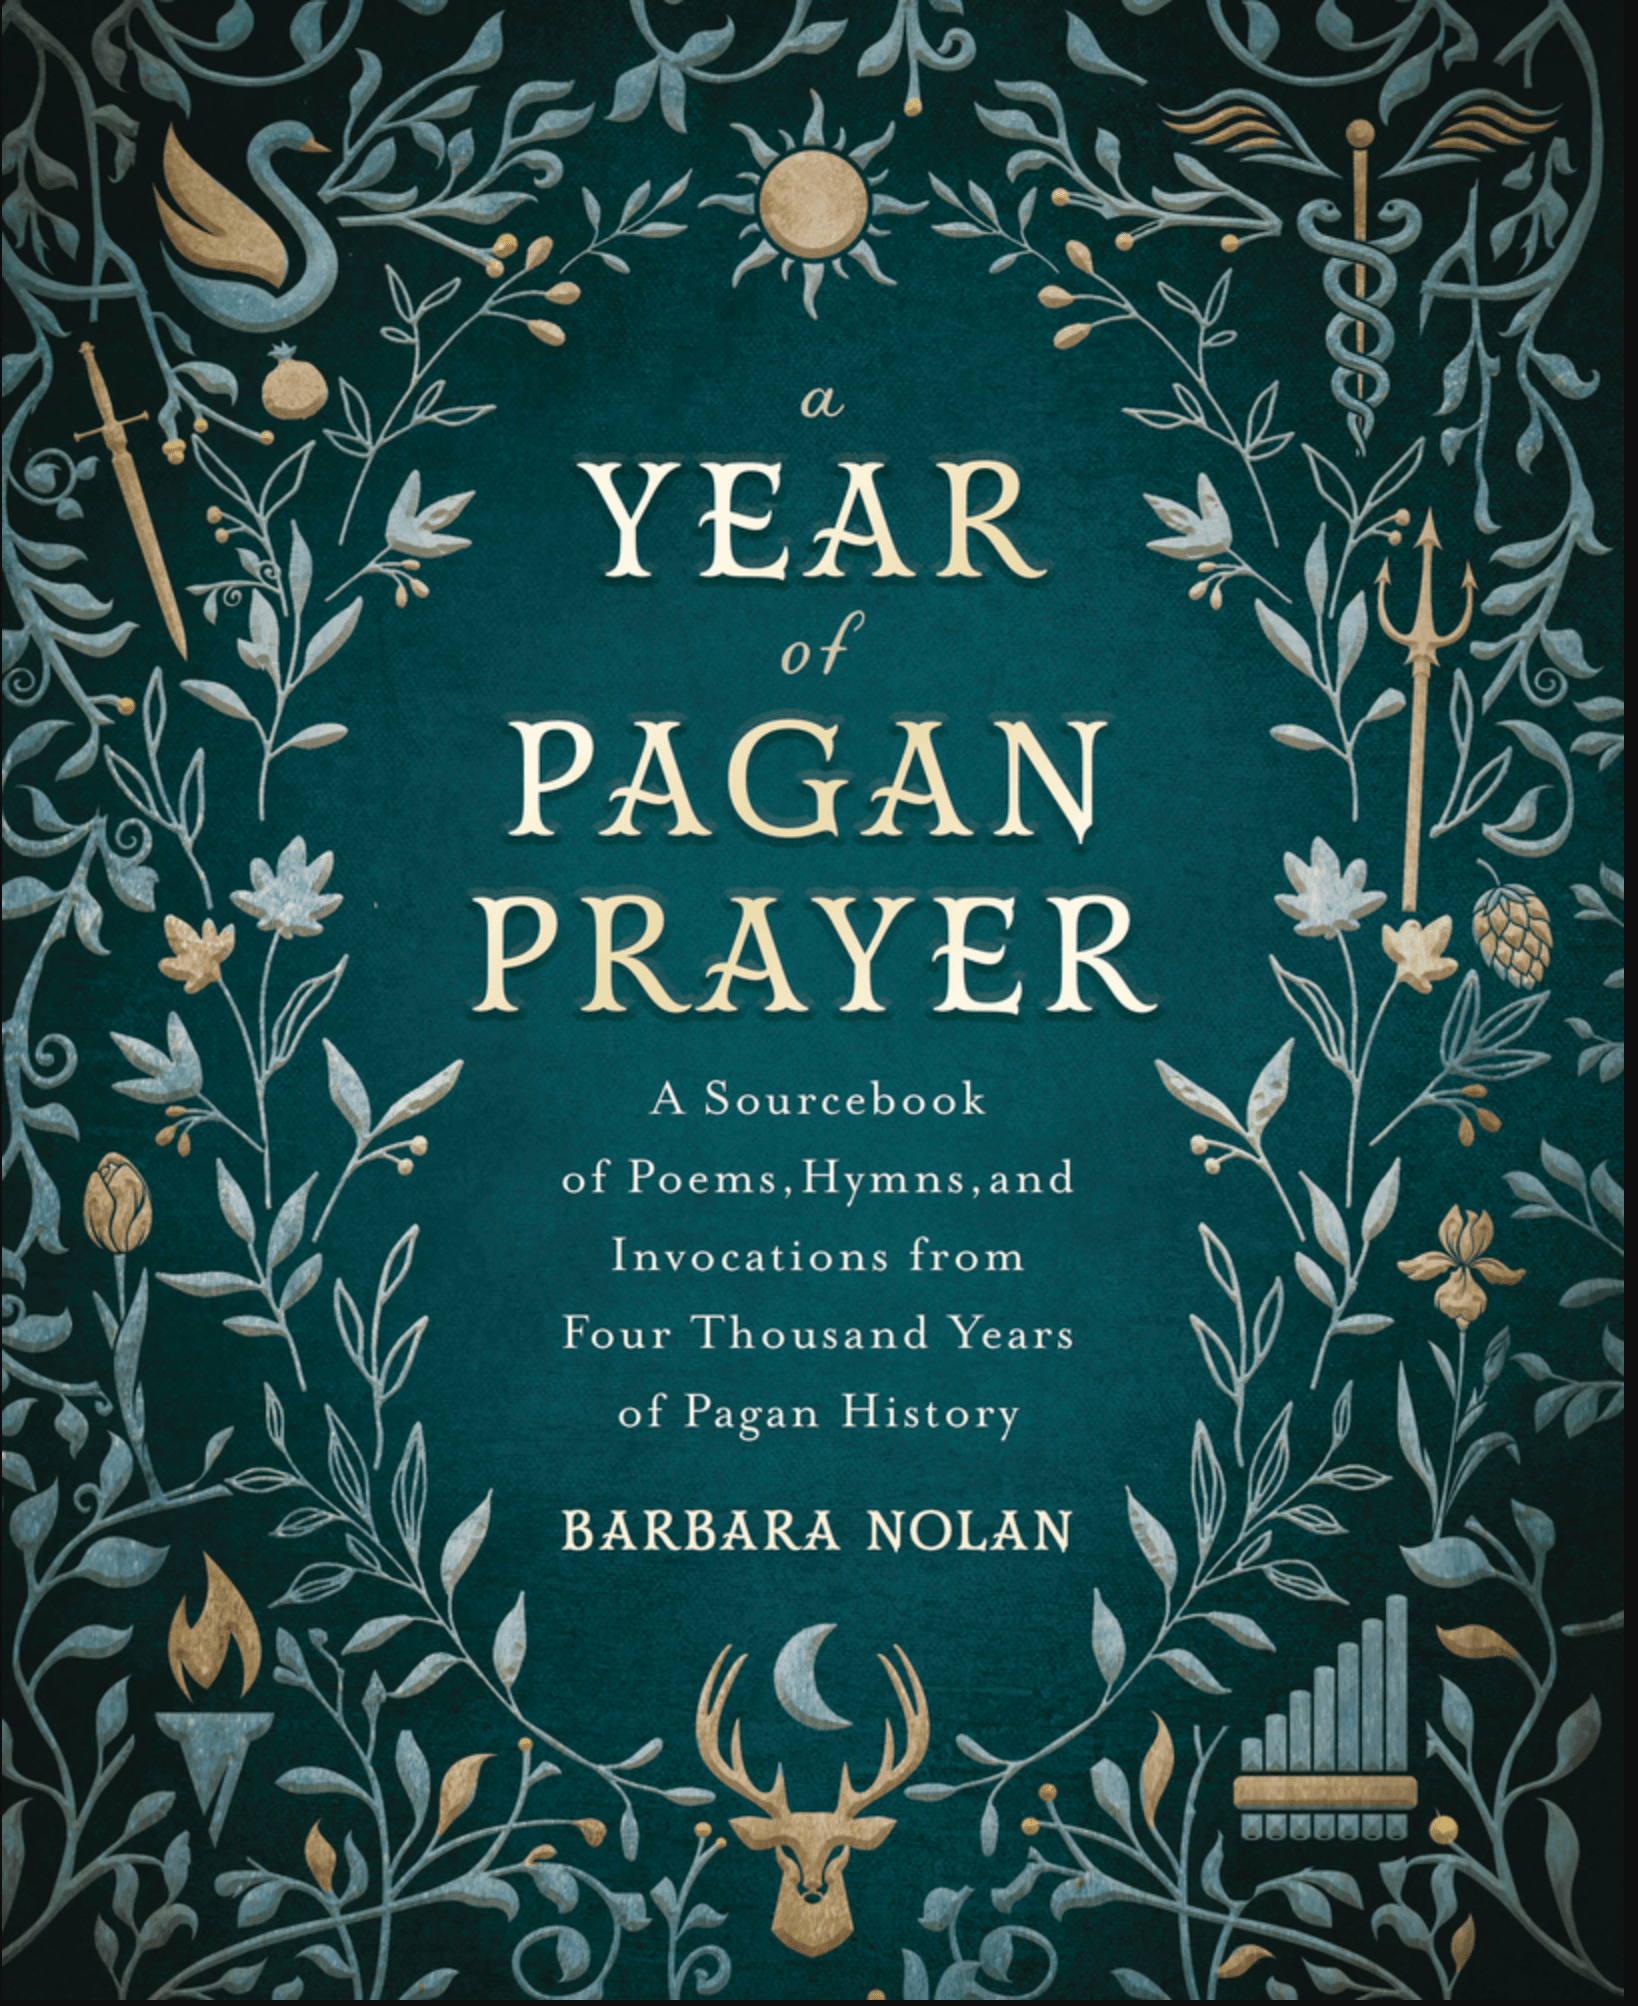 A Year of Pagan Prayer | A Sourcebook of Poems, Hymns and Innovations from Four Thousand Years of Pagan History Spiral Circle